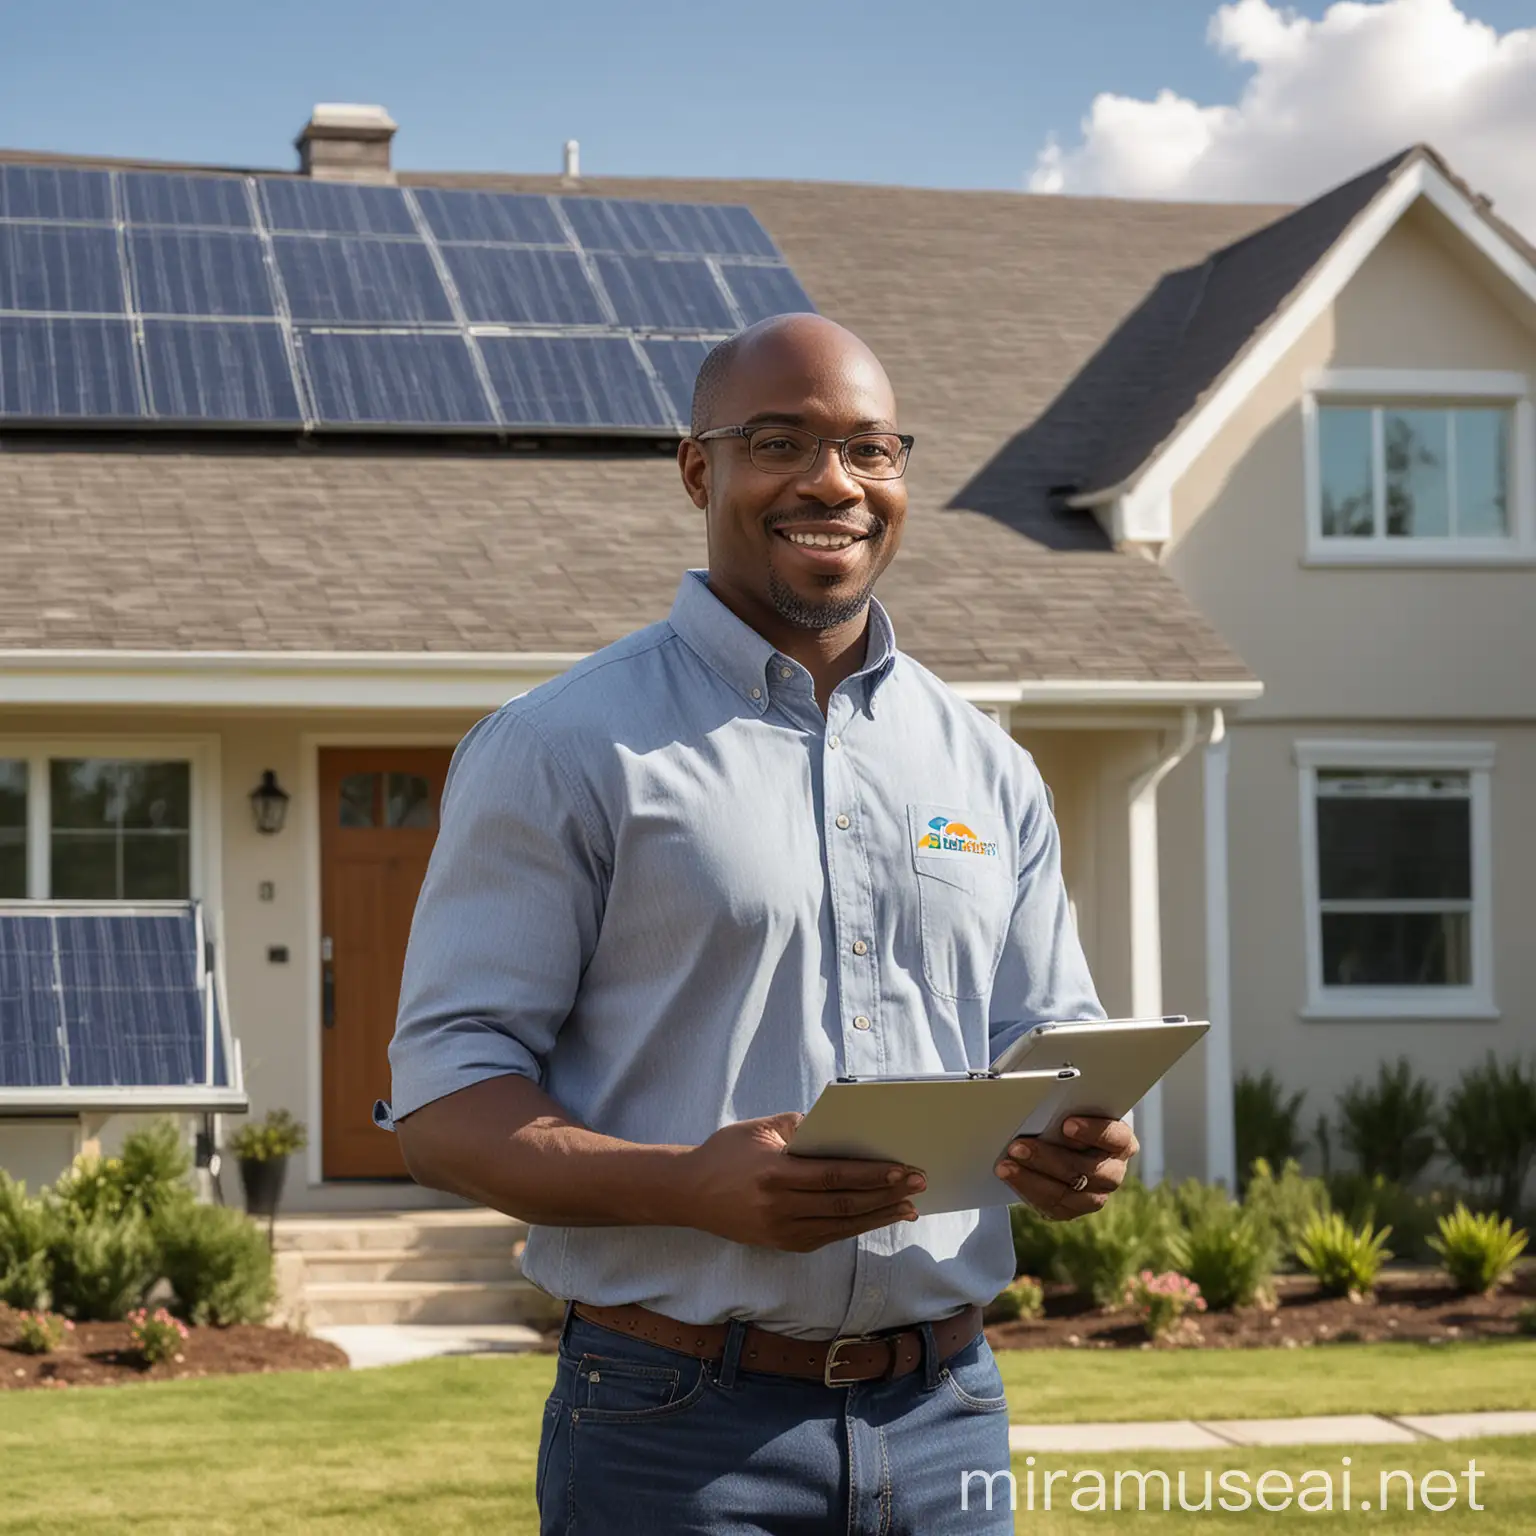 Create an image of an african american professional solar energy consultant presenting a digital guide to a homeowner, with solar panels visible on the house in the background. The scene should be bright and engaging, highlighting the value of solar energy solutions and digital marketing materials.